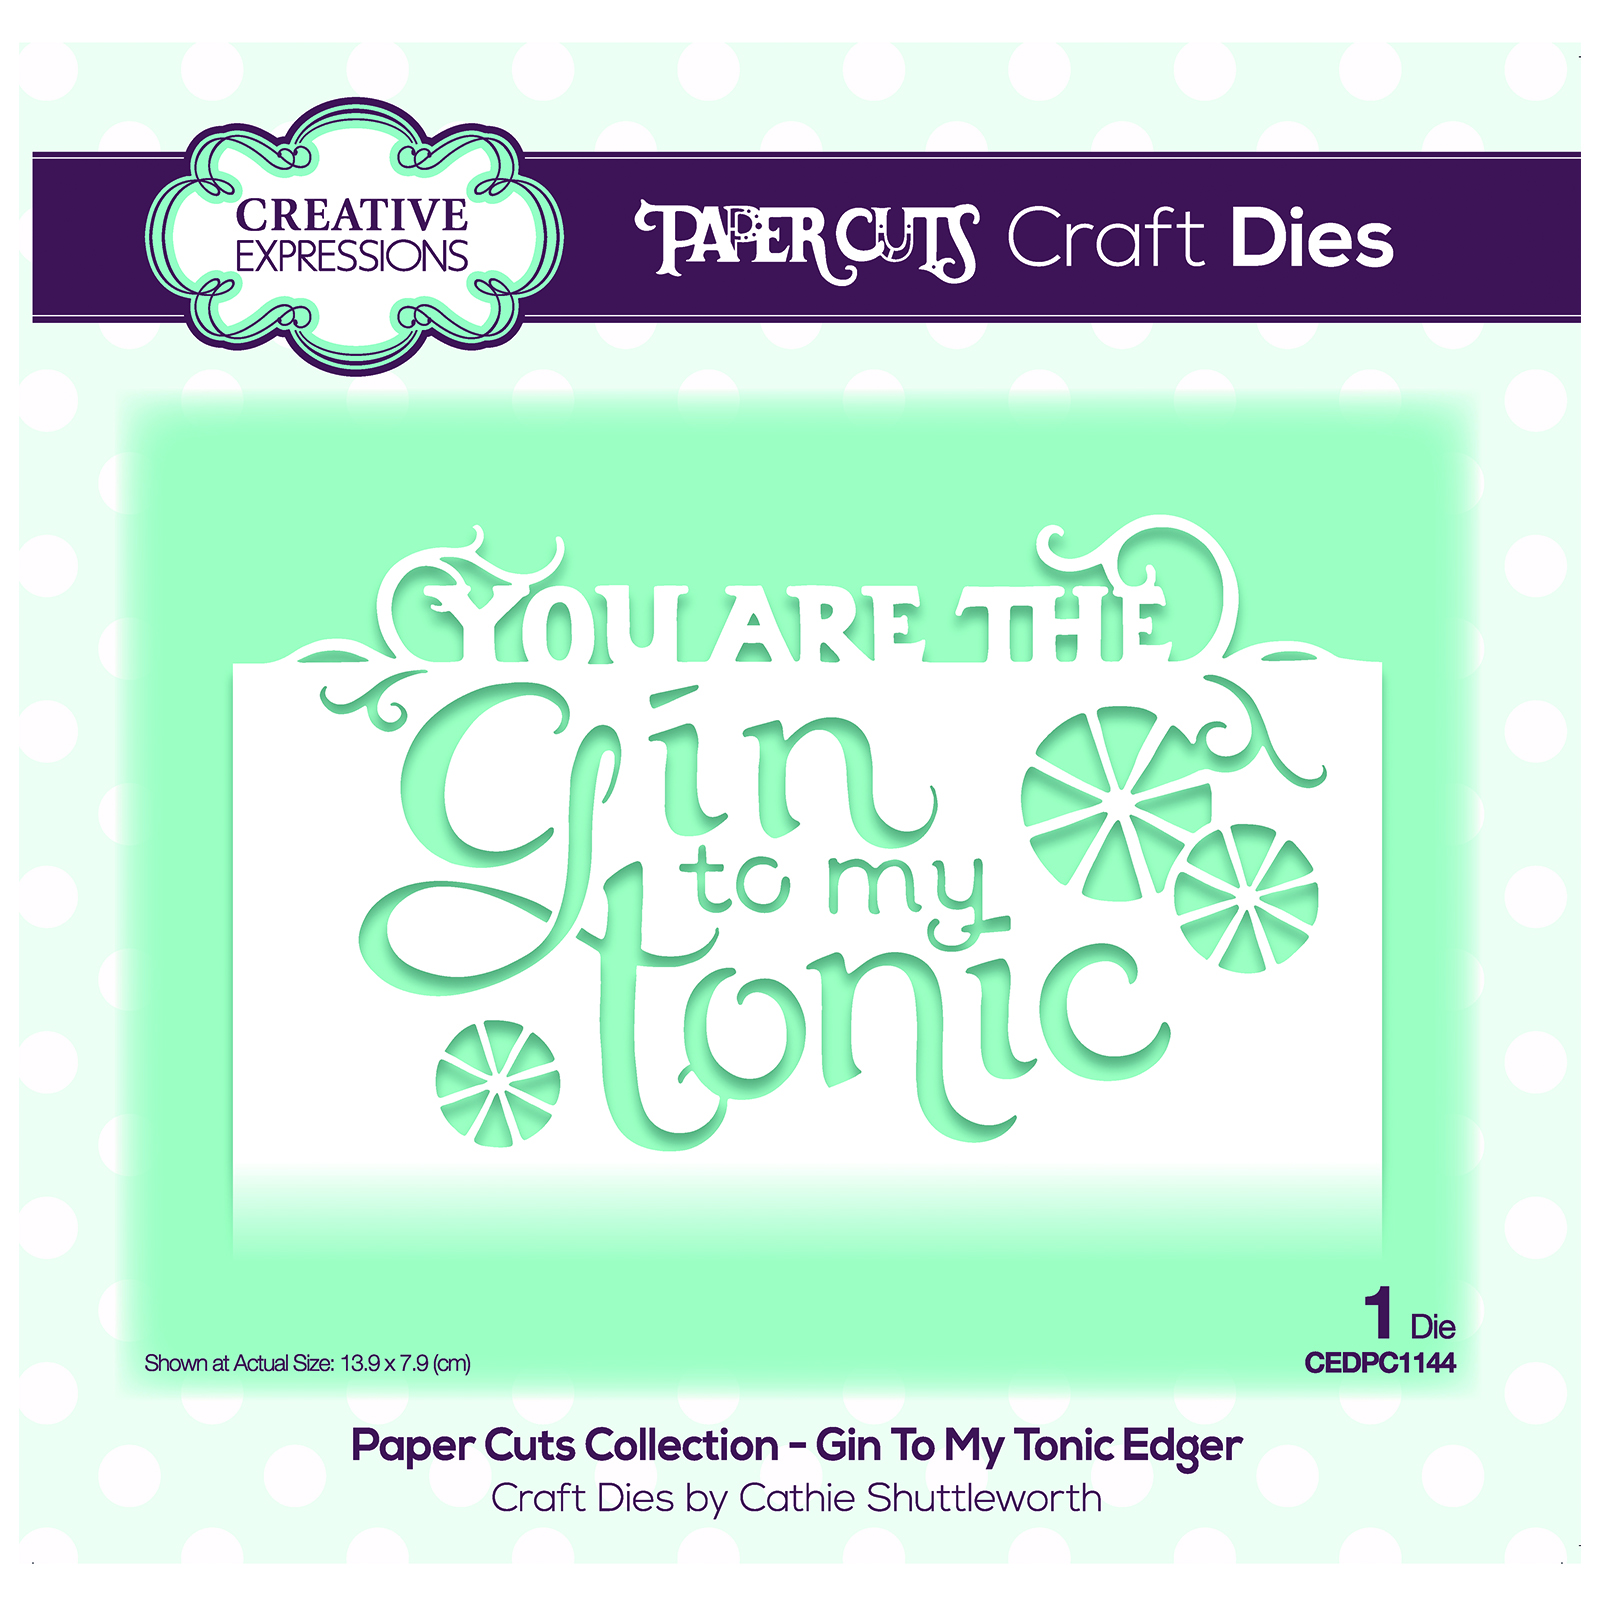 Paper Cuts • Craft Stanzschablone edger Gin to my tonic